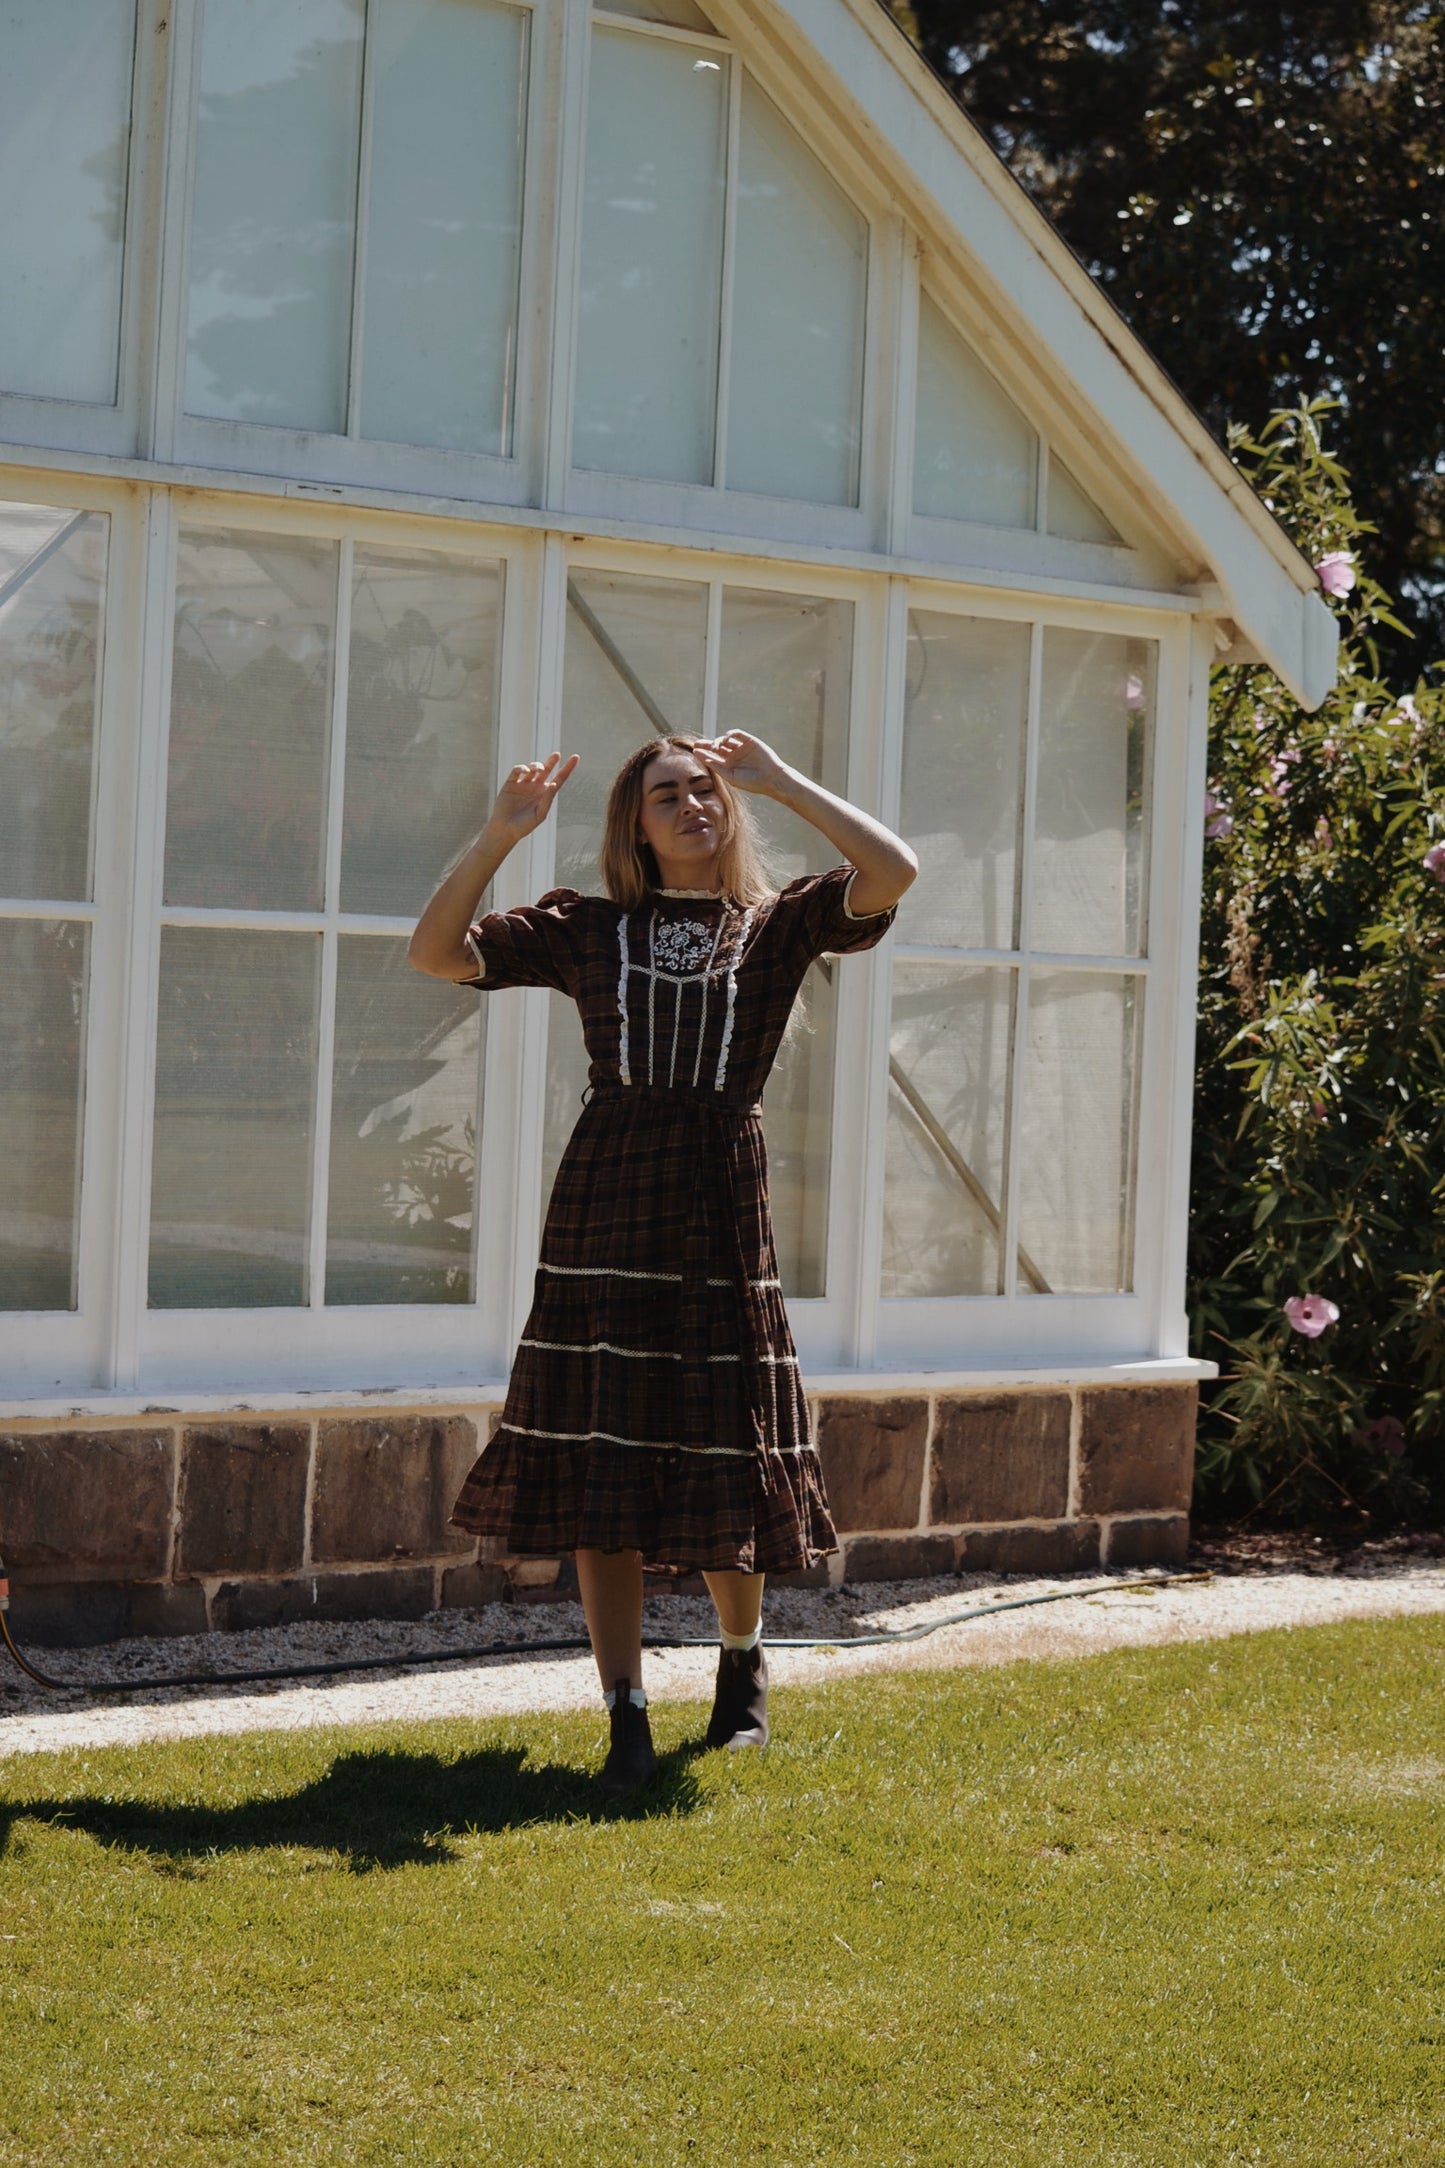 100% RECYCLED COTTON - PAULINA PLAID BROWN COTTON DRESS